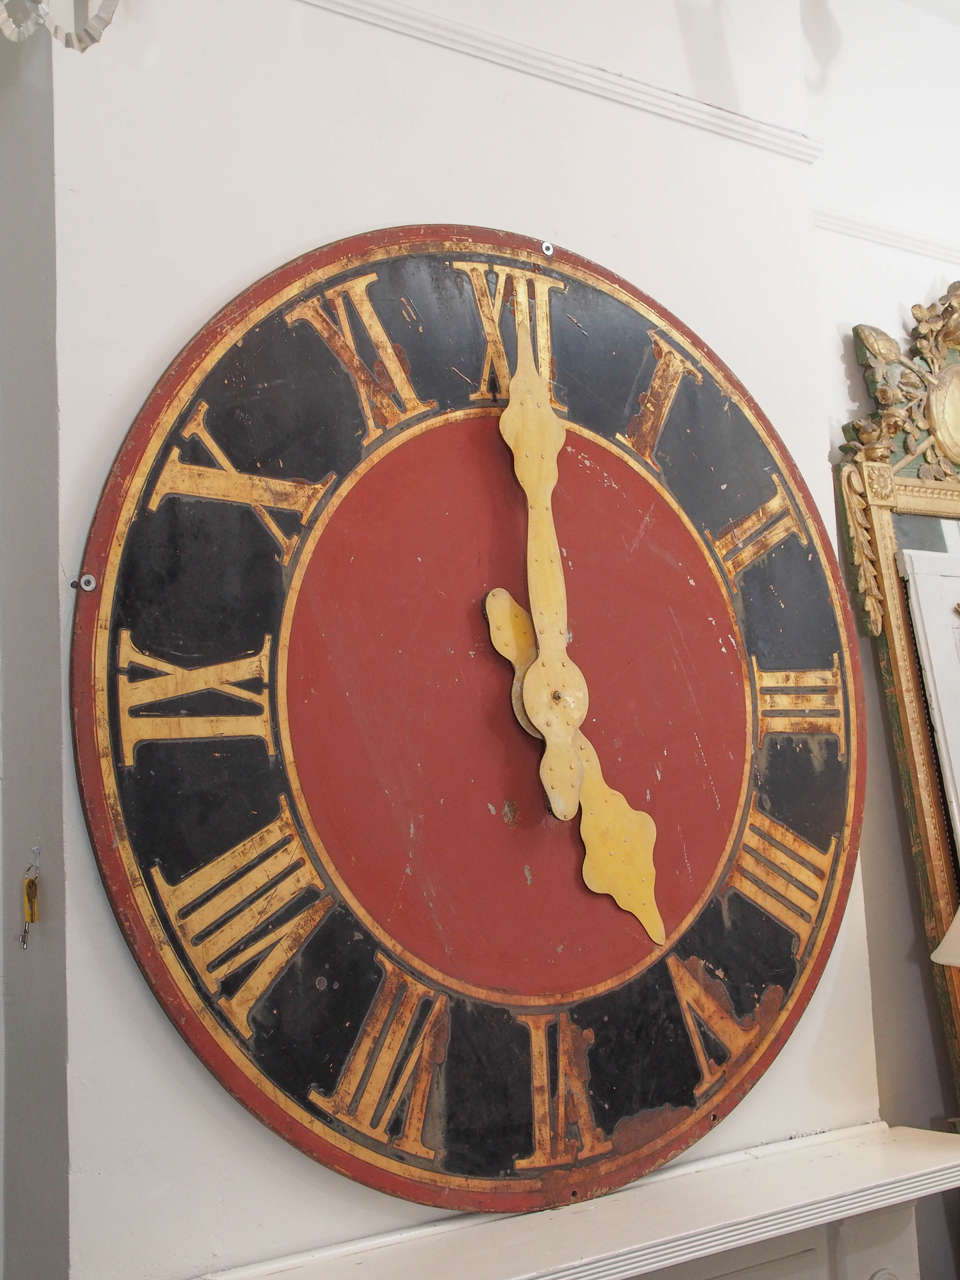 19th century very large iron clock painted in black, gold, yellow and red. Contemporary use as a wall decoration. No functioning mechanism.